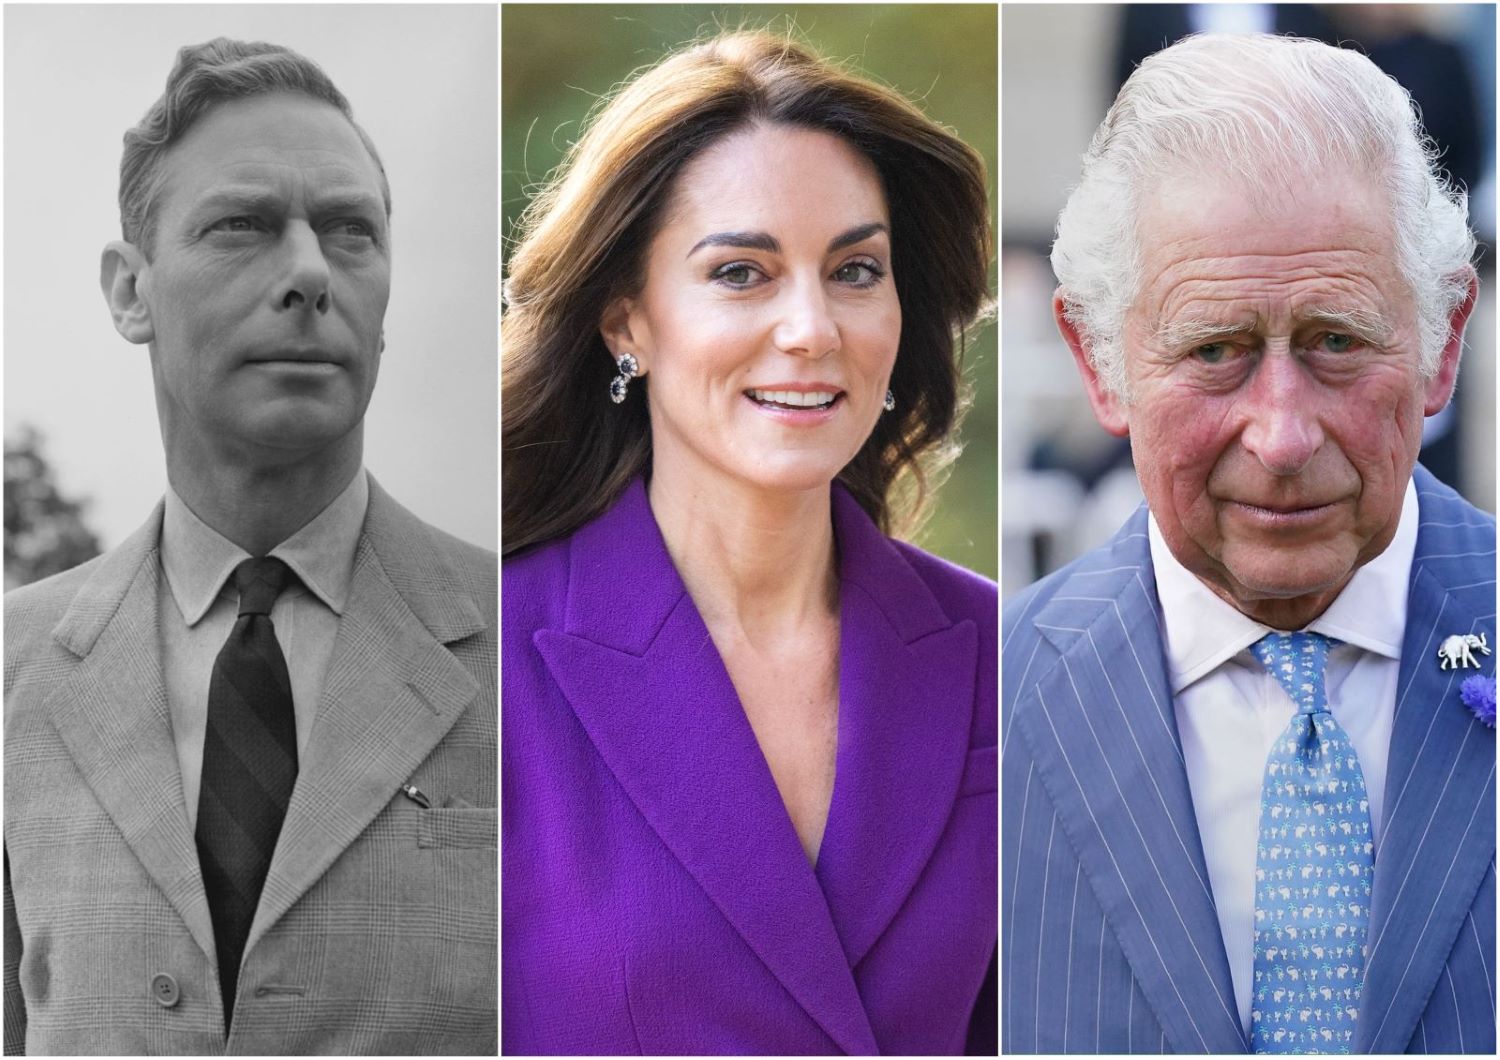 Members of the House of Windsor diagnosed with cancer.